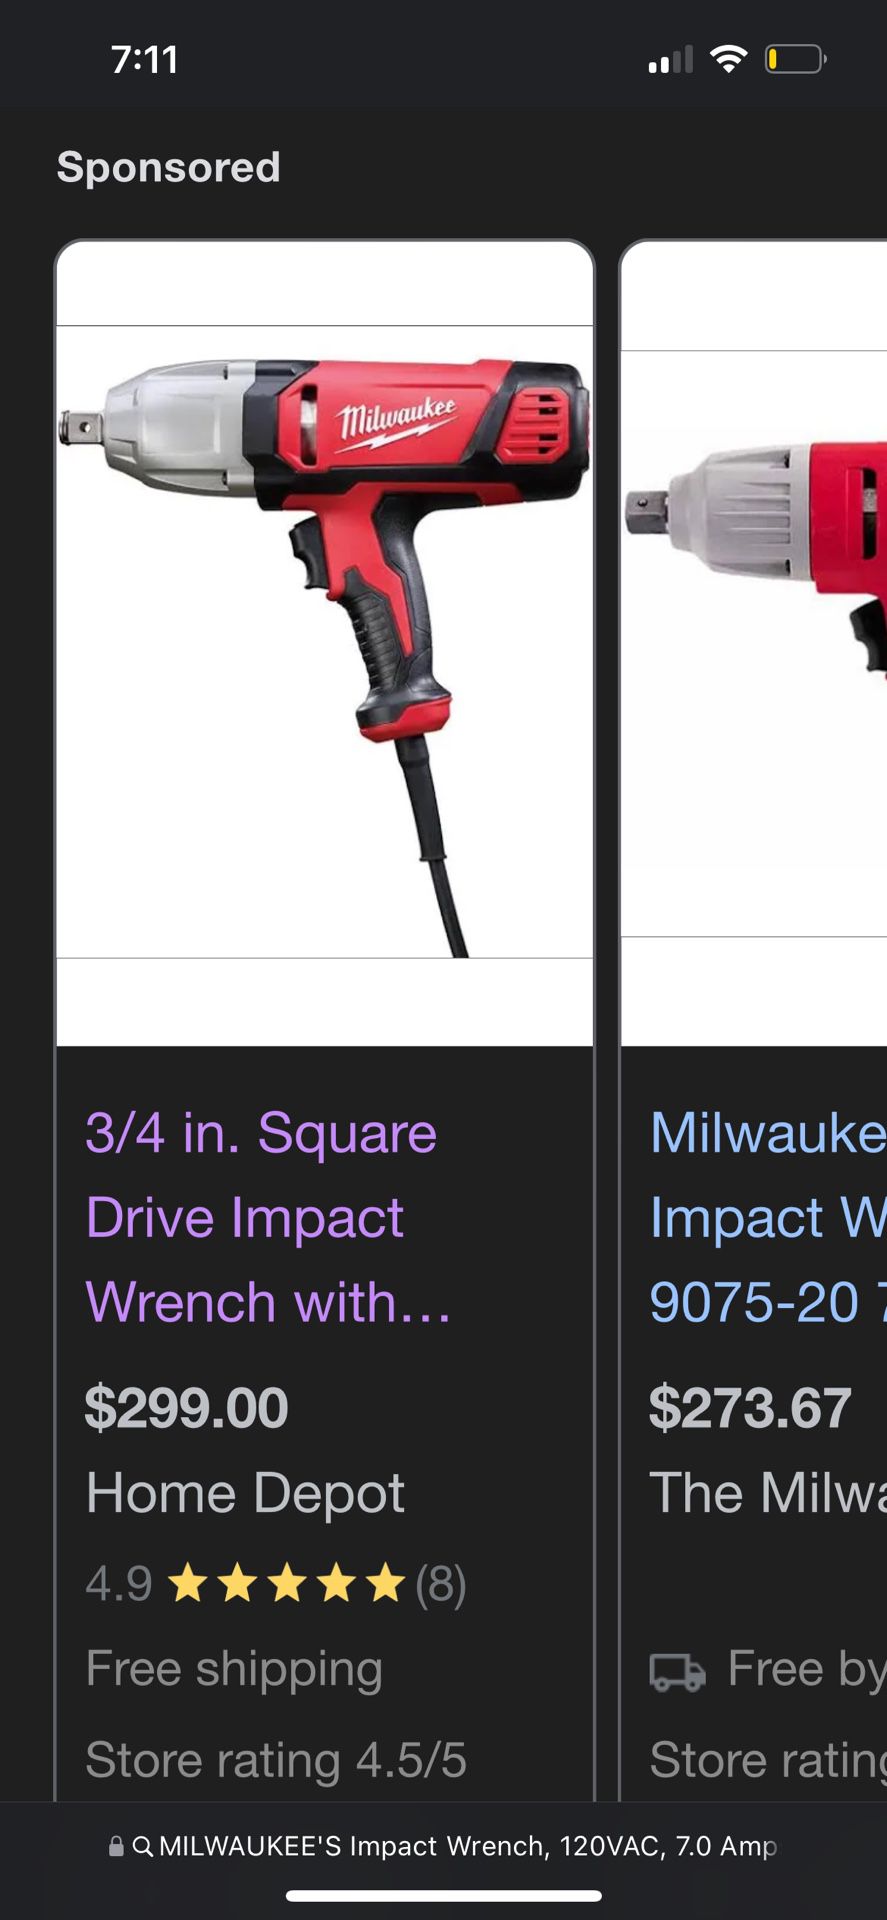 3/4 In. Square Drive Impact Wrench